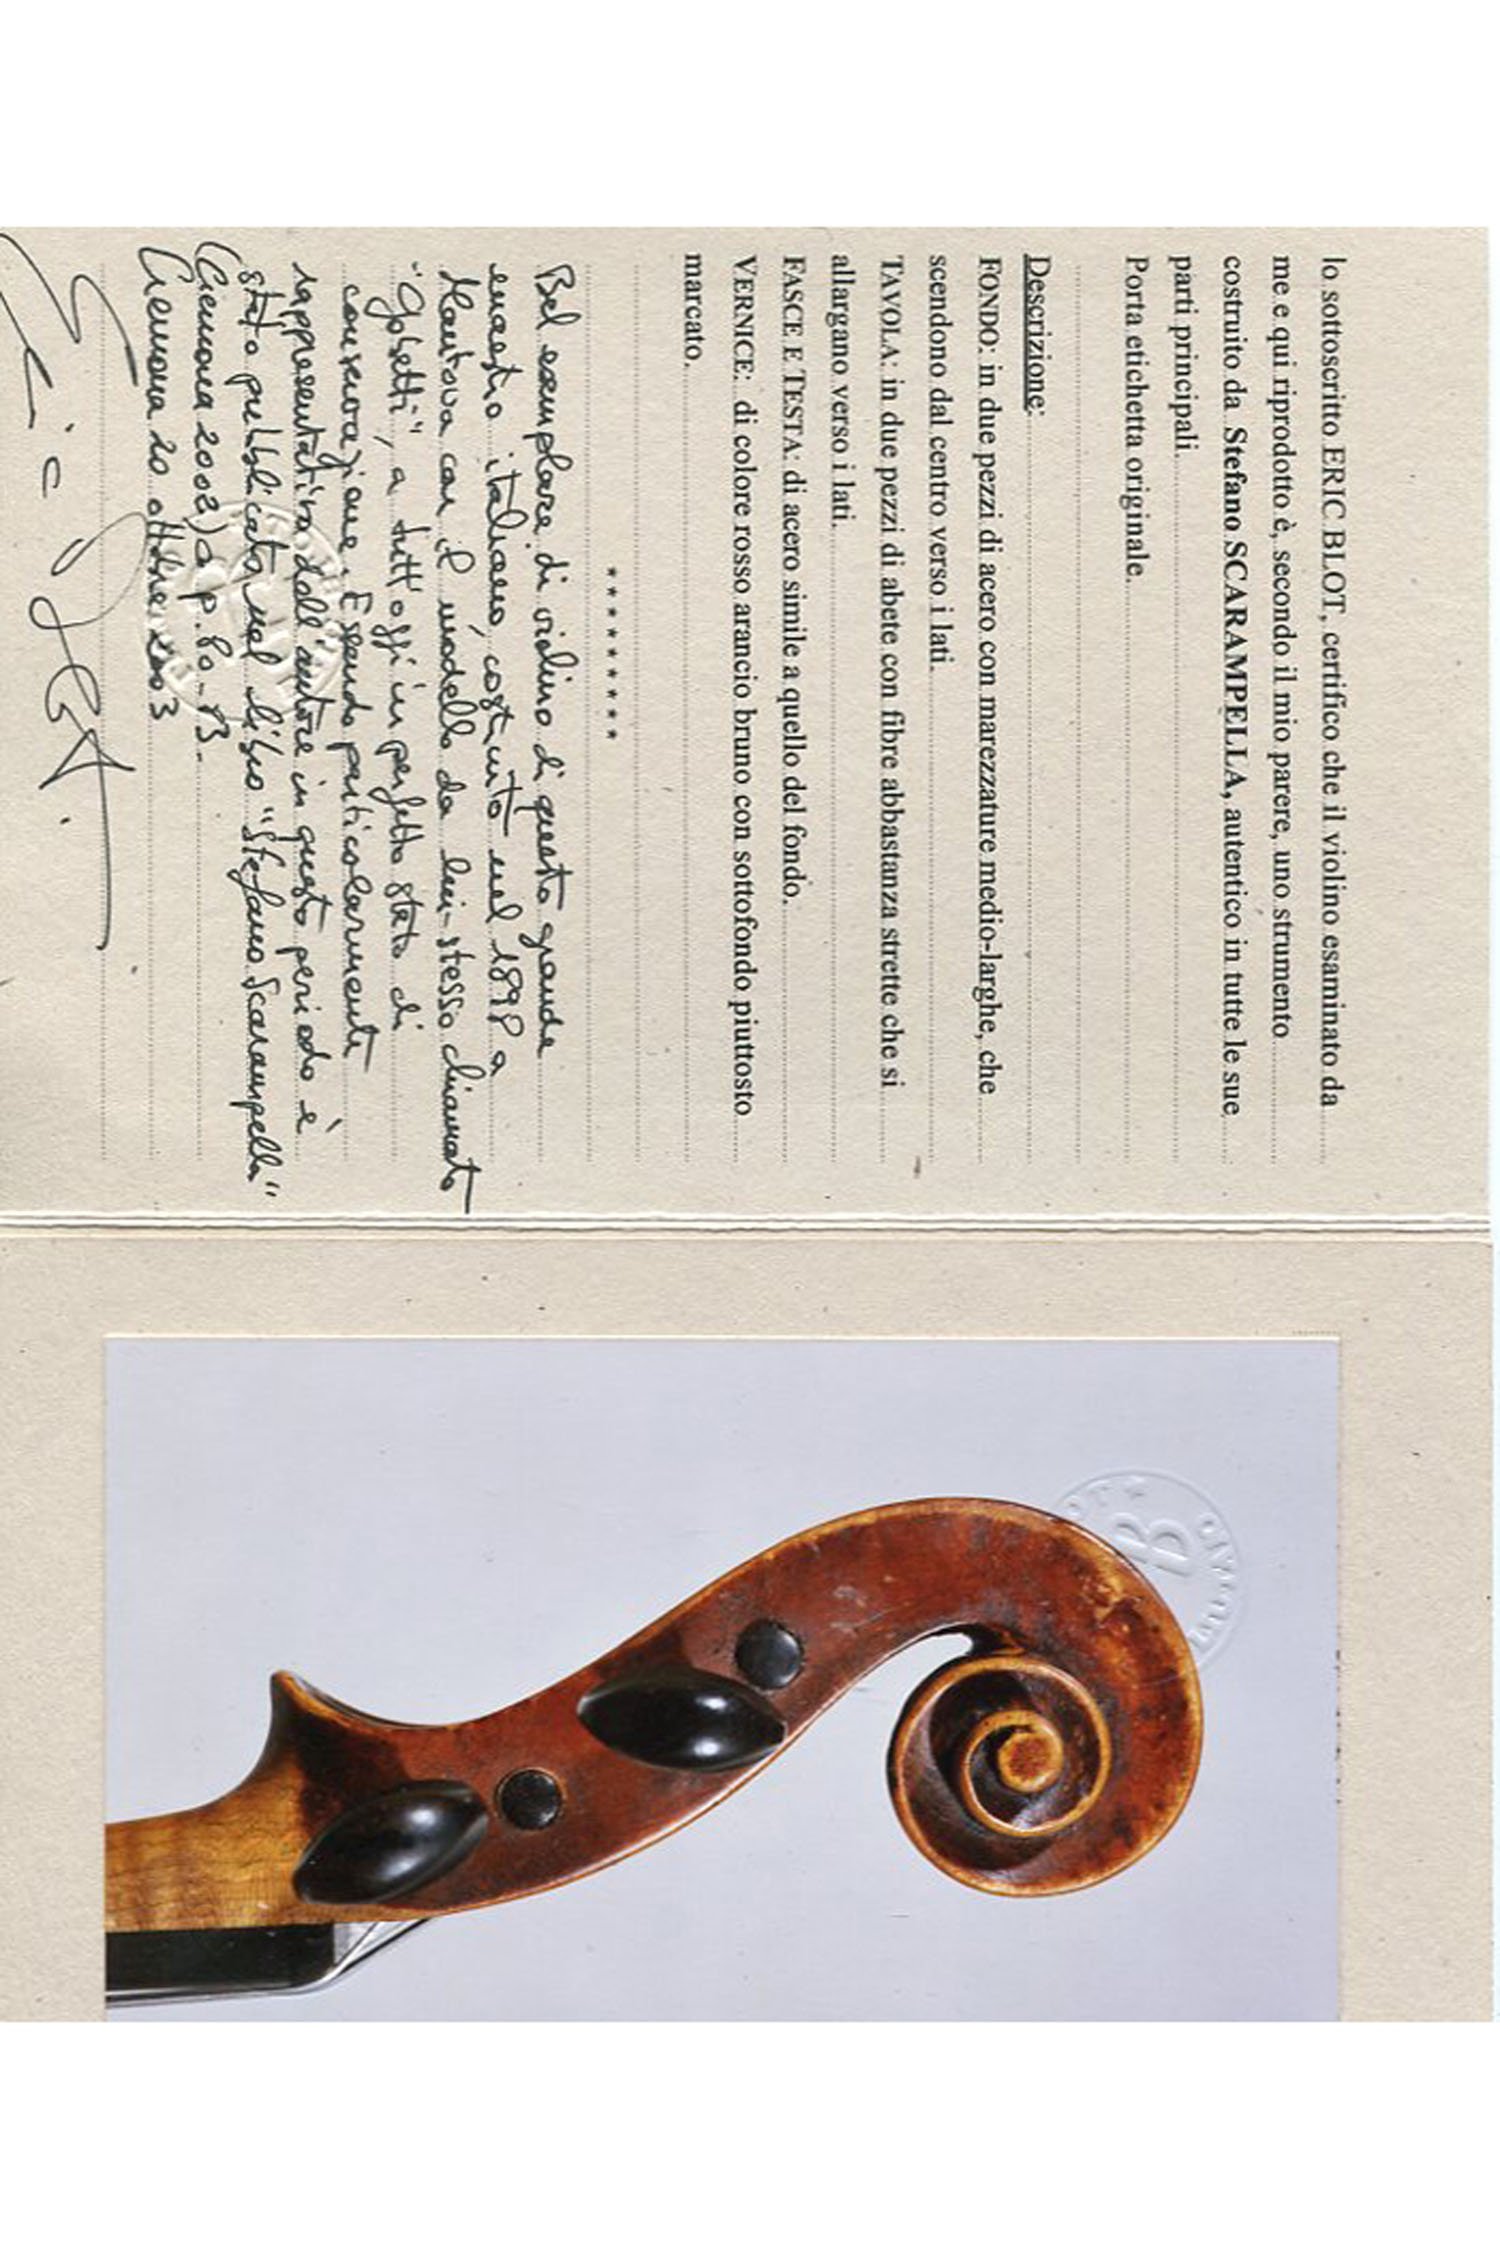 Lot 96 An Extremely Fine Italian Violin By Stefano